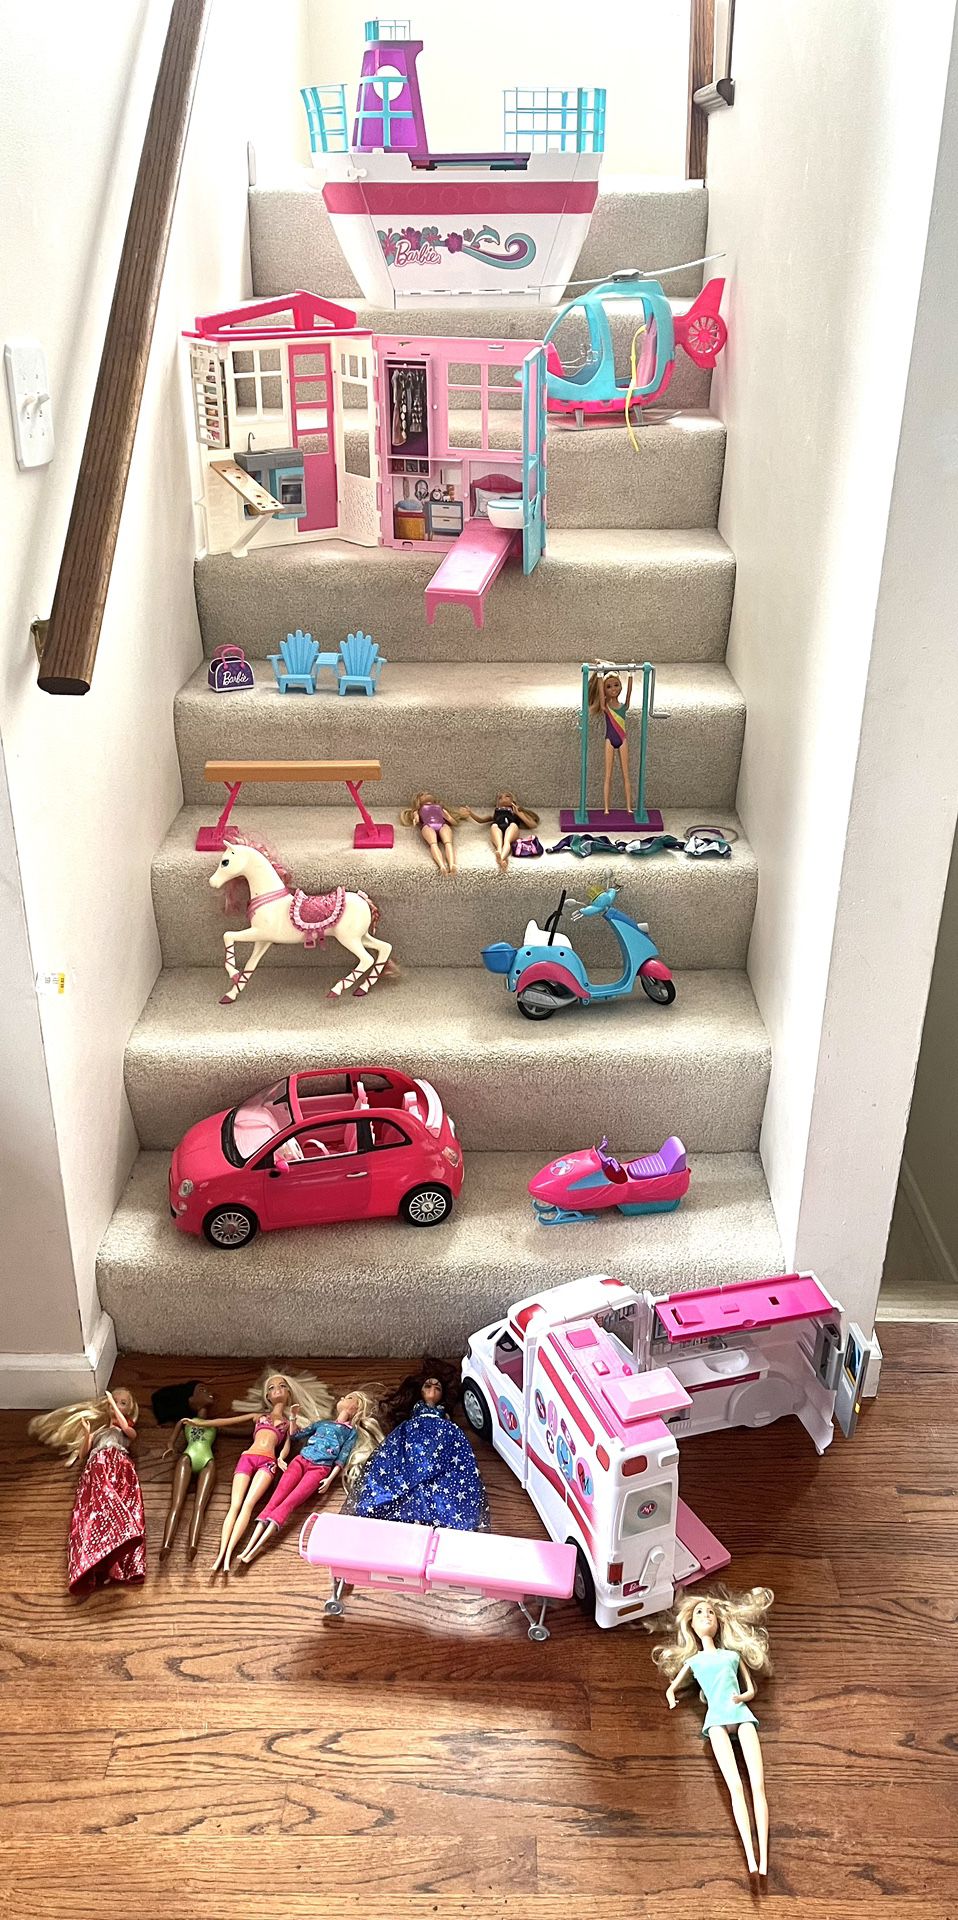 Huge Lot Of Barbie Toys! Cruise Ship, Ambulance, House, Helicopter, Gymnastics Set, Dolls & More! ($105 For All)